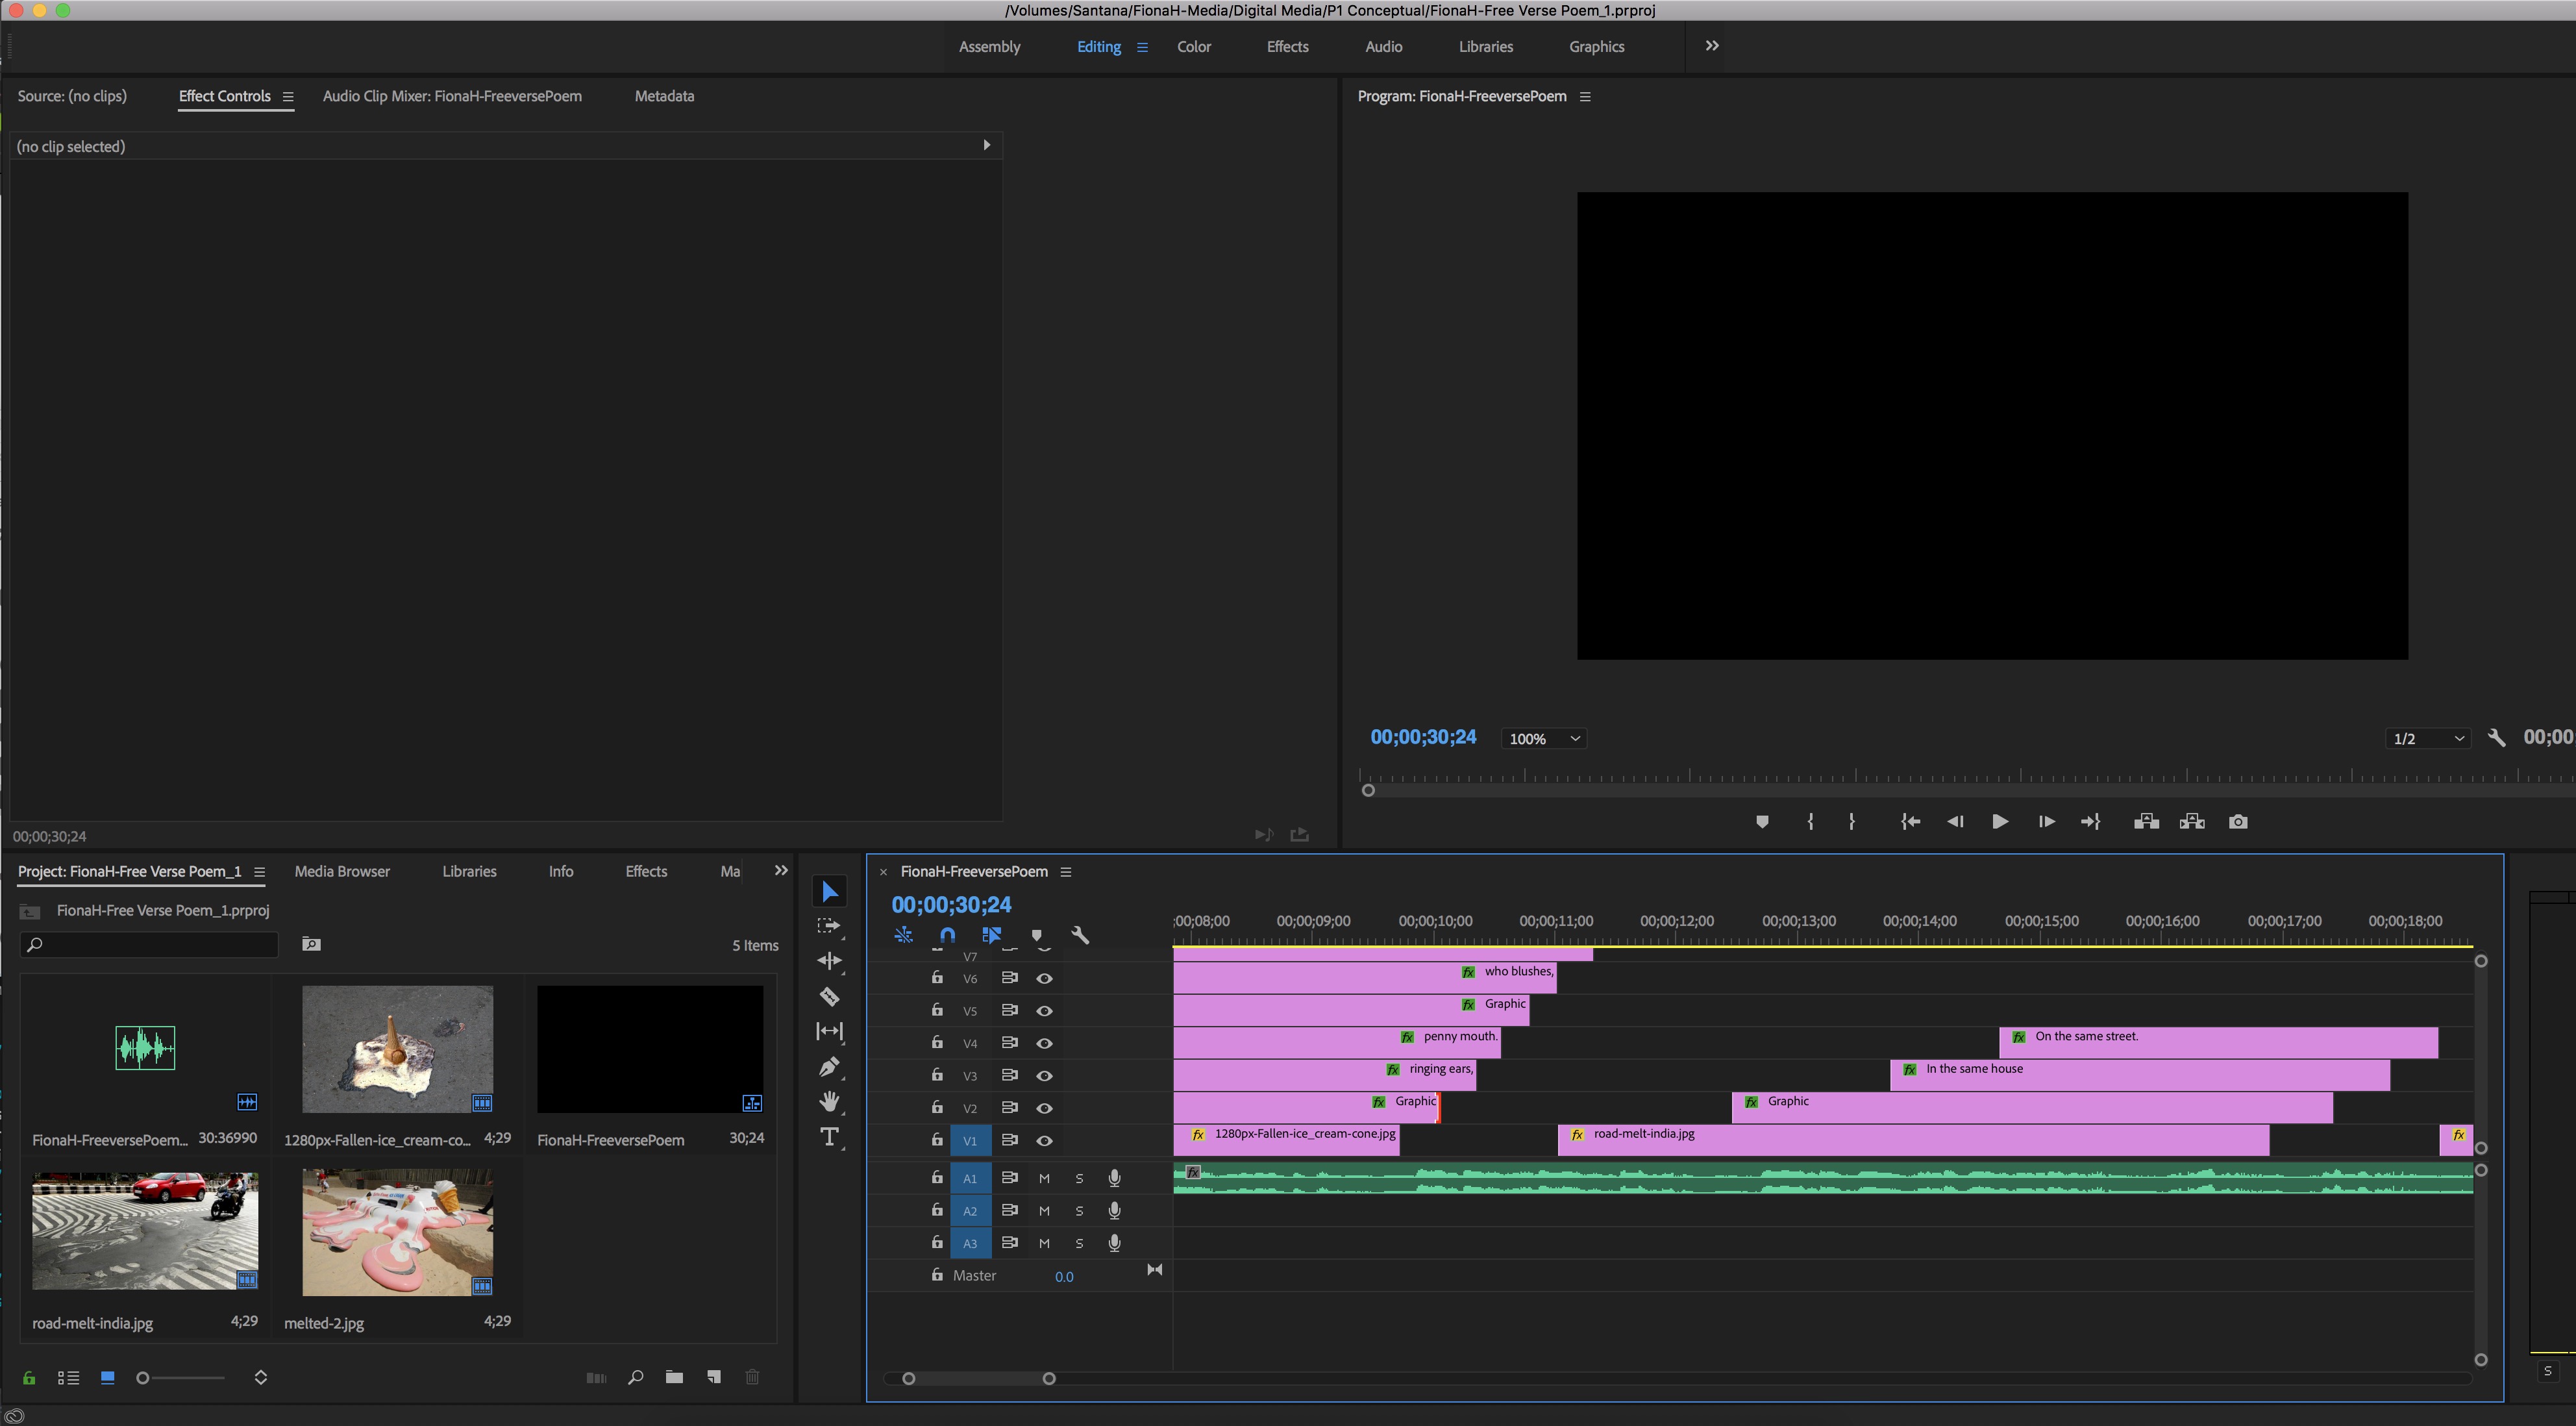 this is a screenshot of the free verse poem editing process in Premiere Pro